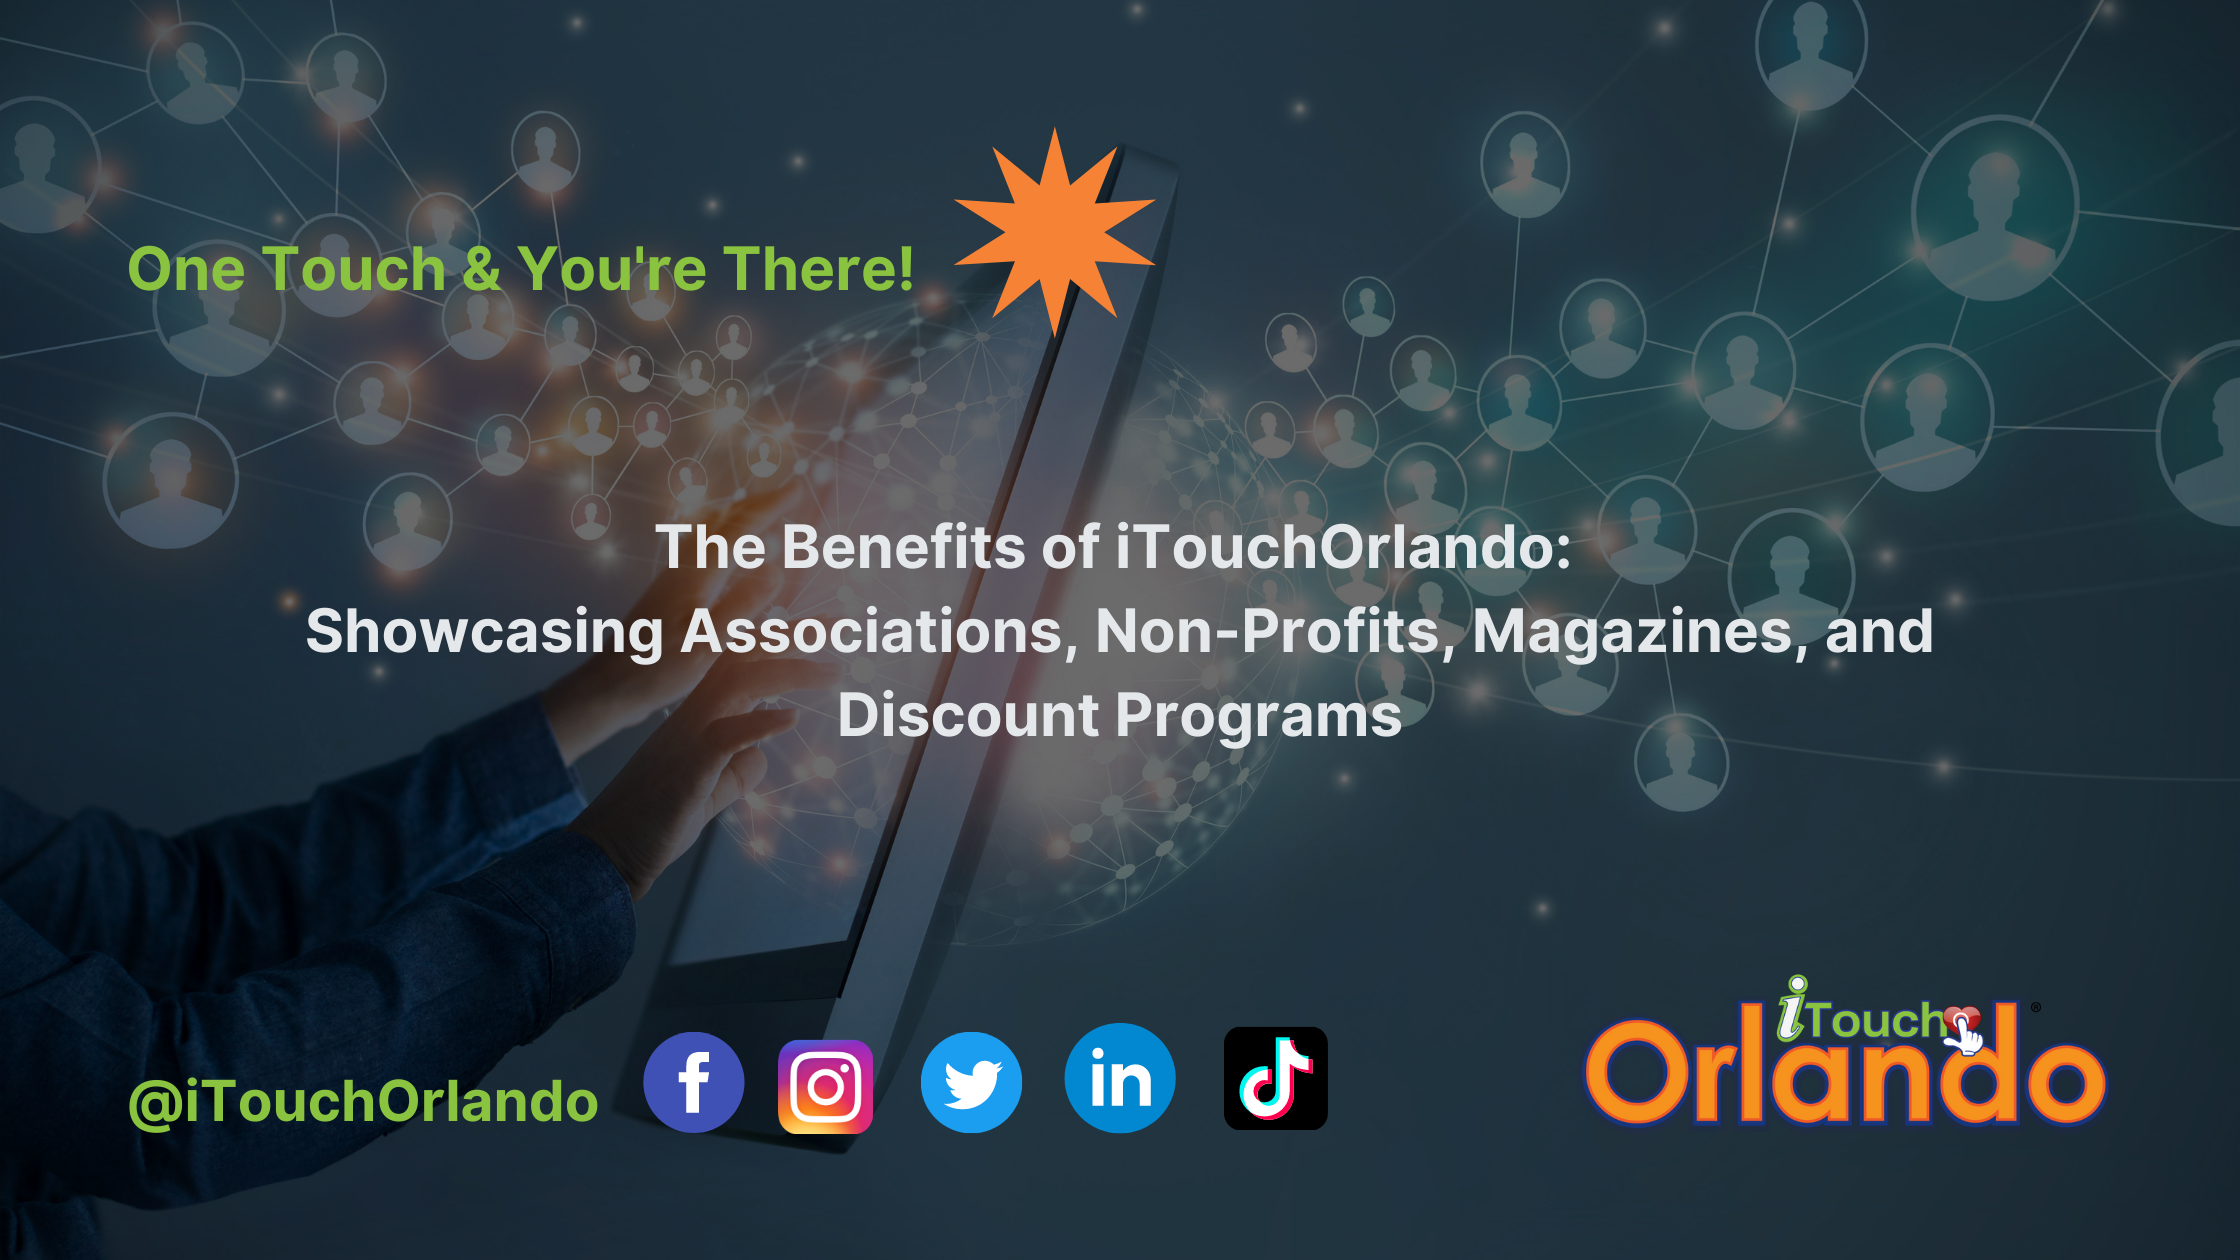 The Benefits of iTouchOrlando: Showcasing Associations, Non-Profits, Magazines, and Discount Programs